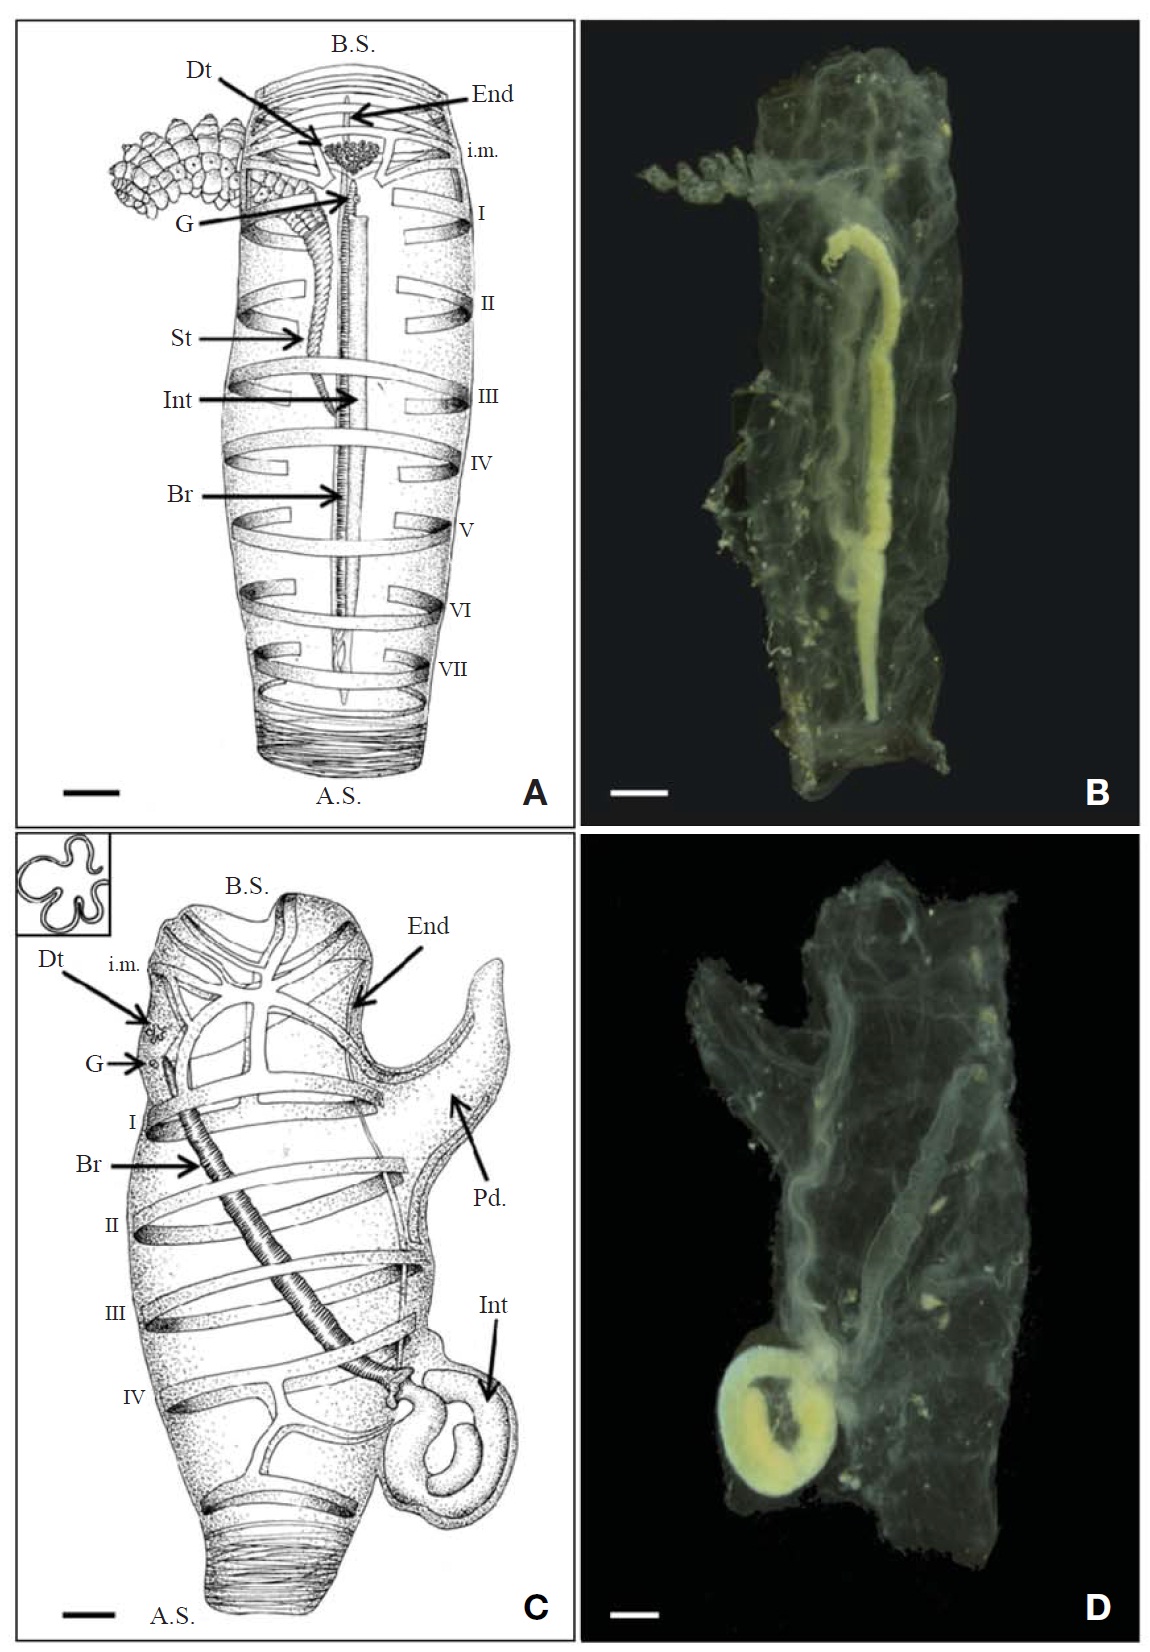 Cyclosalpa affinis (Chamisso, 1819). A, B, Solitary zooid, dorsal view; C, D, Aggregate zooid; C, Right side view; D, Left side view. A.S., atrial siphon; Br, branchial septum; B.S., buccal siphon; Dt, dorsal turbercle; End, endostyle; G, ganglion; i.m., intermediate muscle; Int, Intestine; I-VI, body muscles; Pd., peduncle; St, stolon. Scale bars: A, B=6 mm, C, D=3mm.